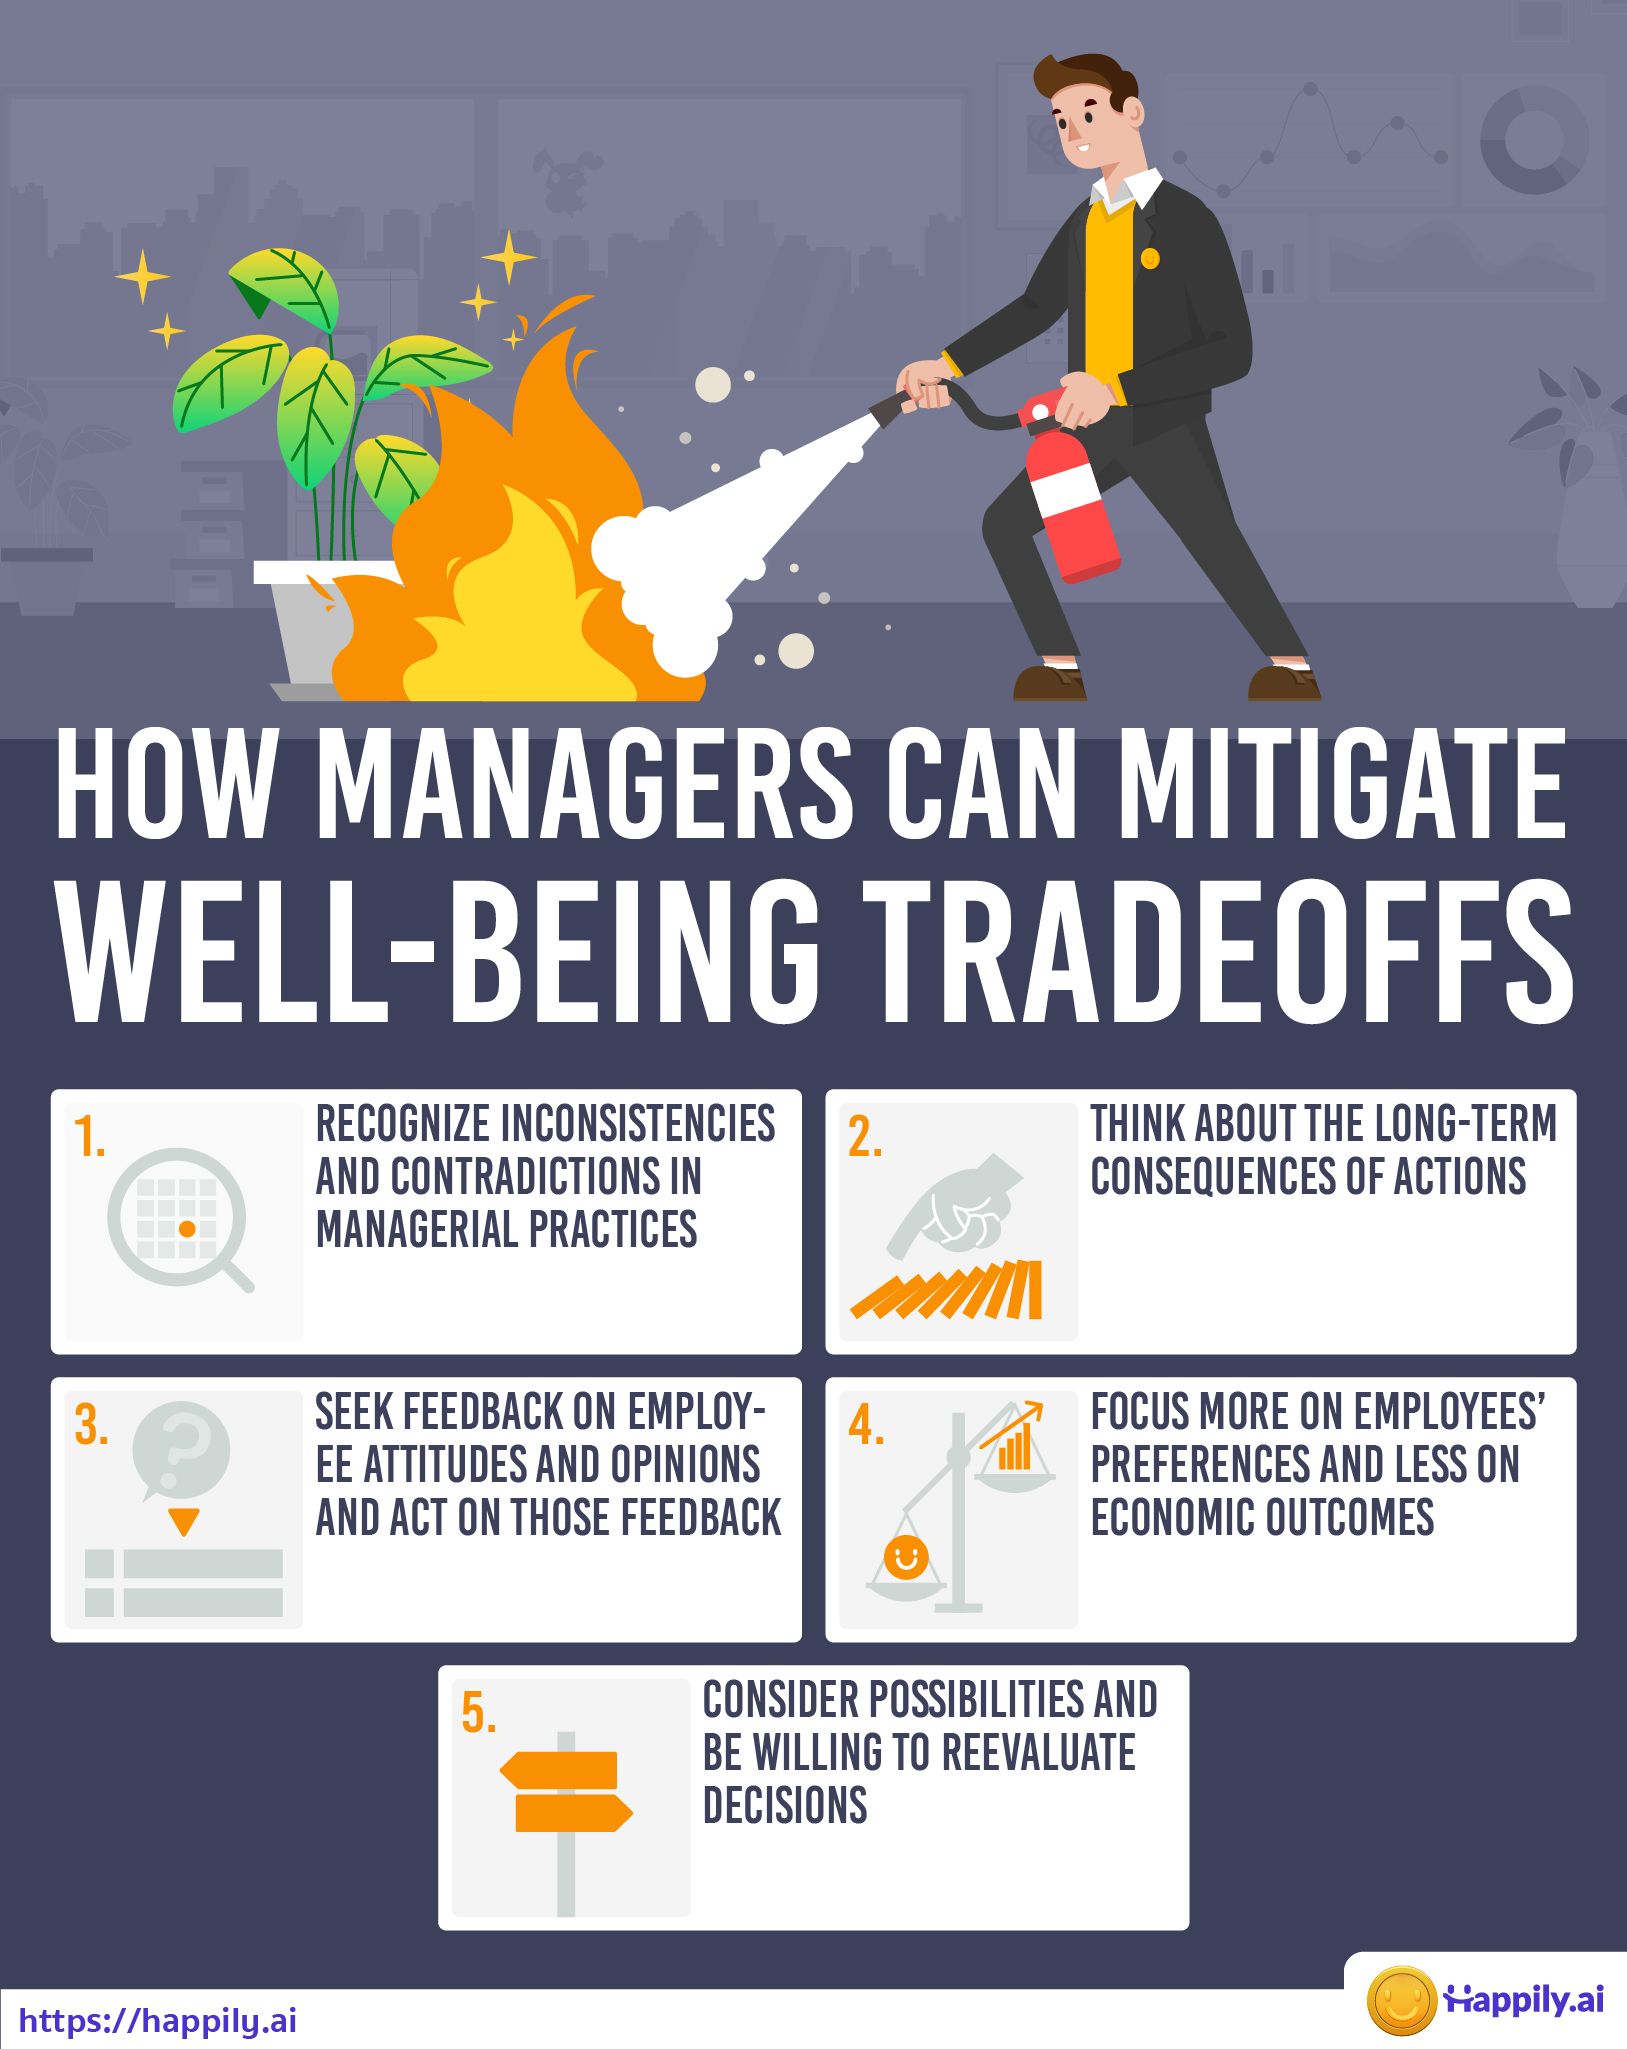 How managers can mitigate well-being tradeoffs